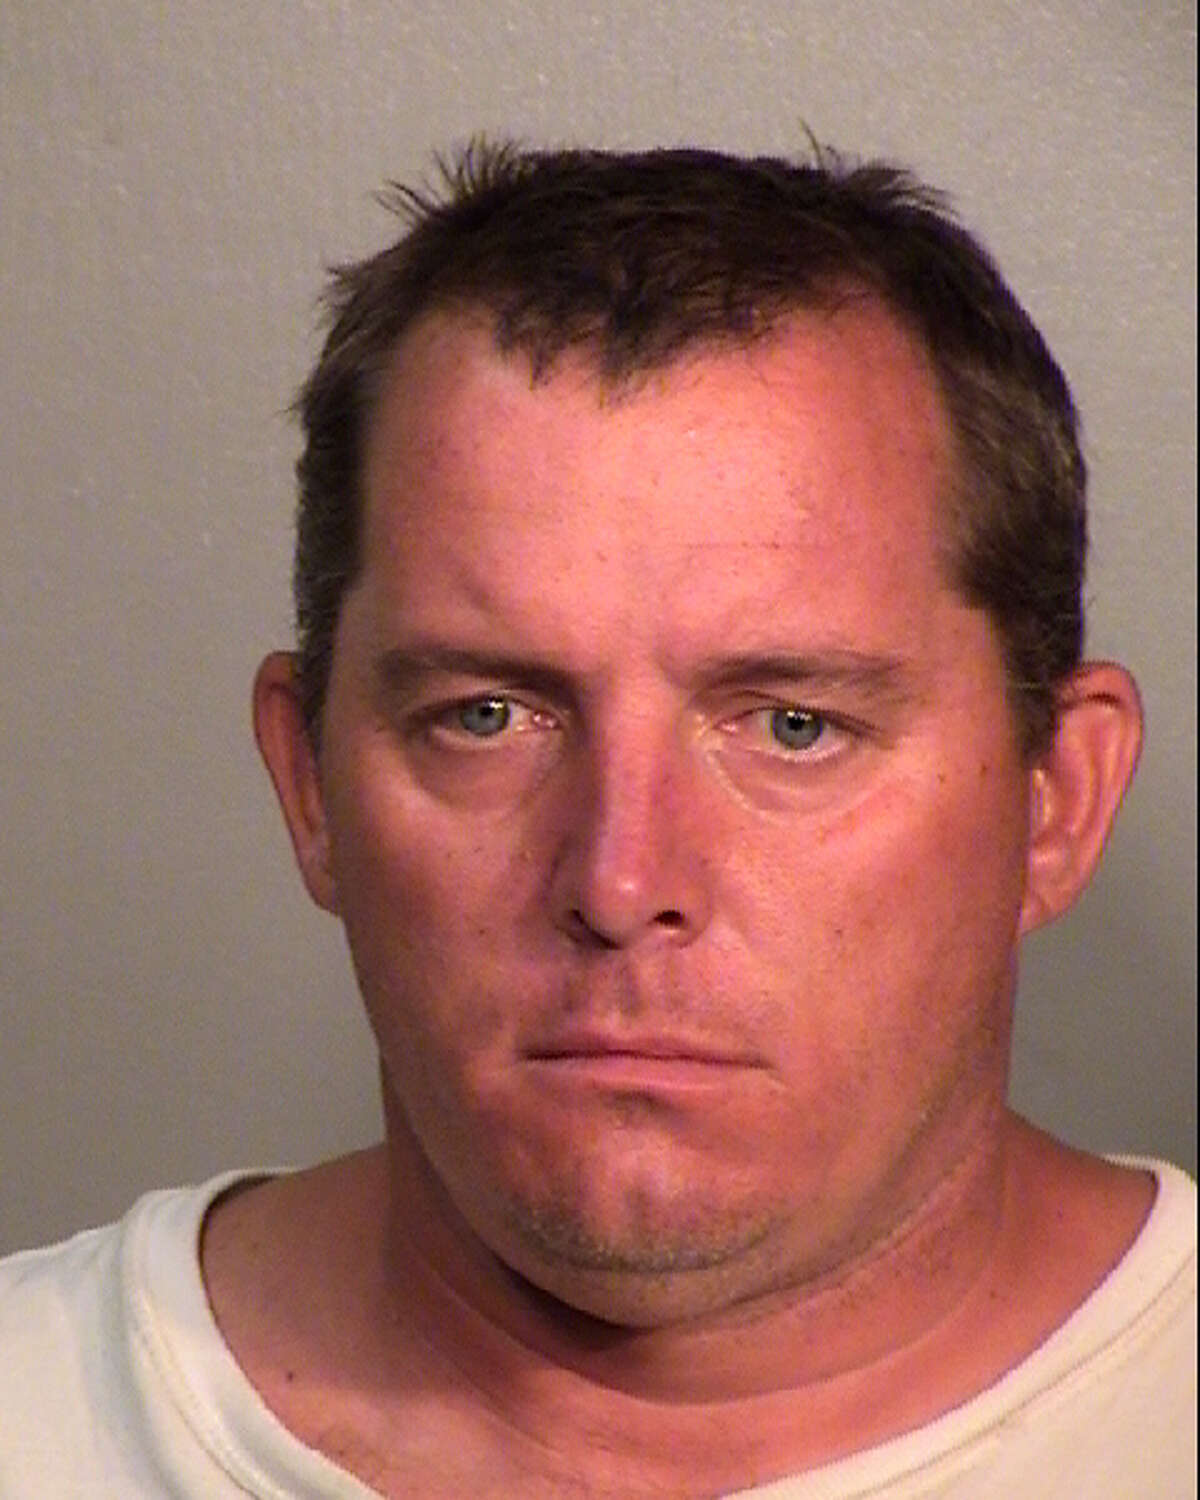 Barry Uhr, a paramedic with the San Antonio Fire Department, was arrested Saturday on a charge of family violence.